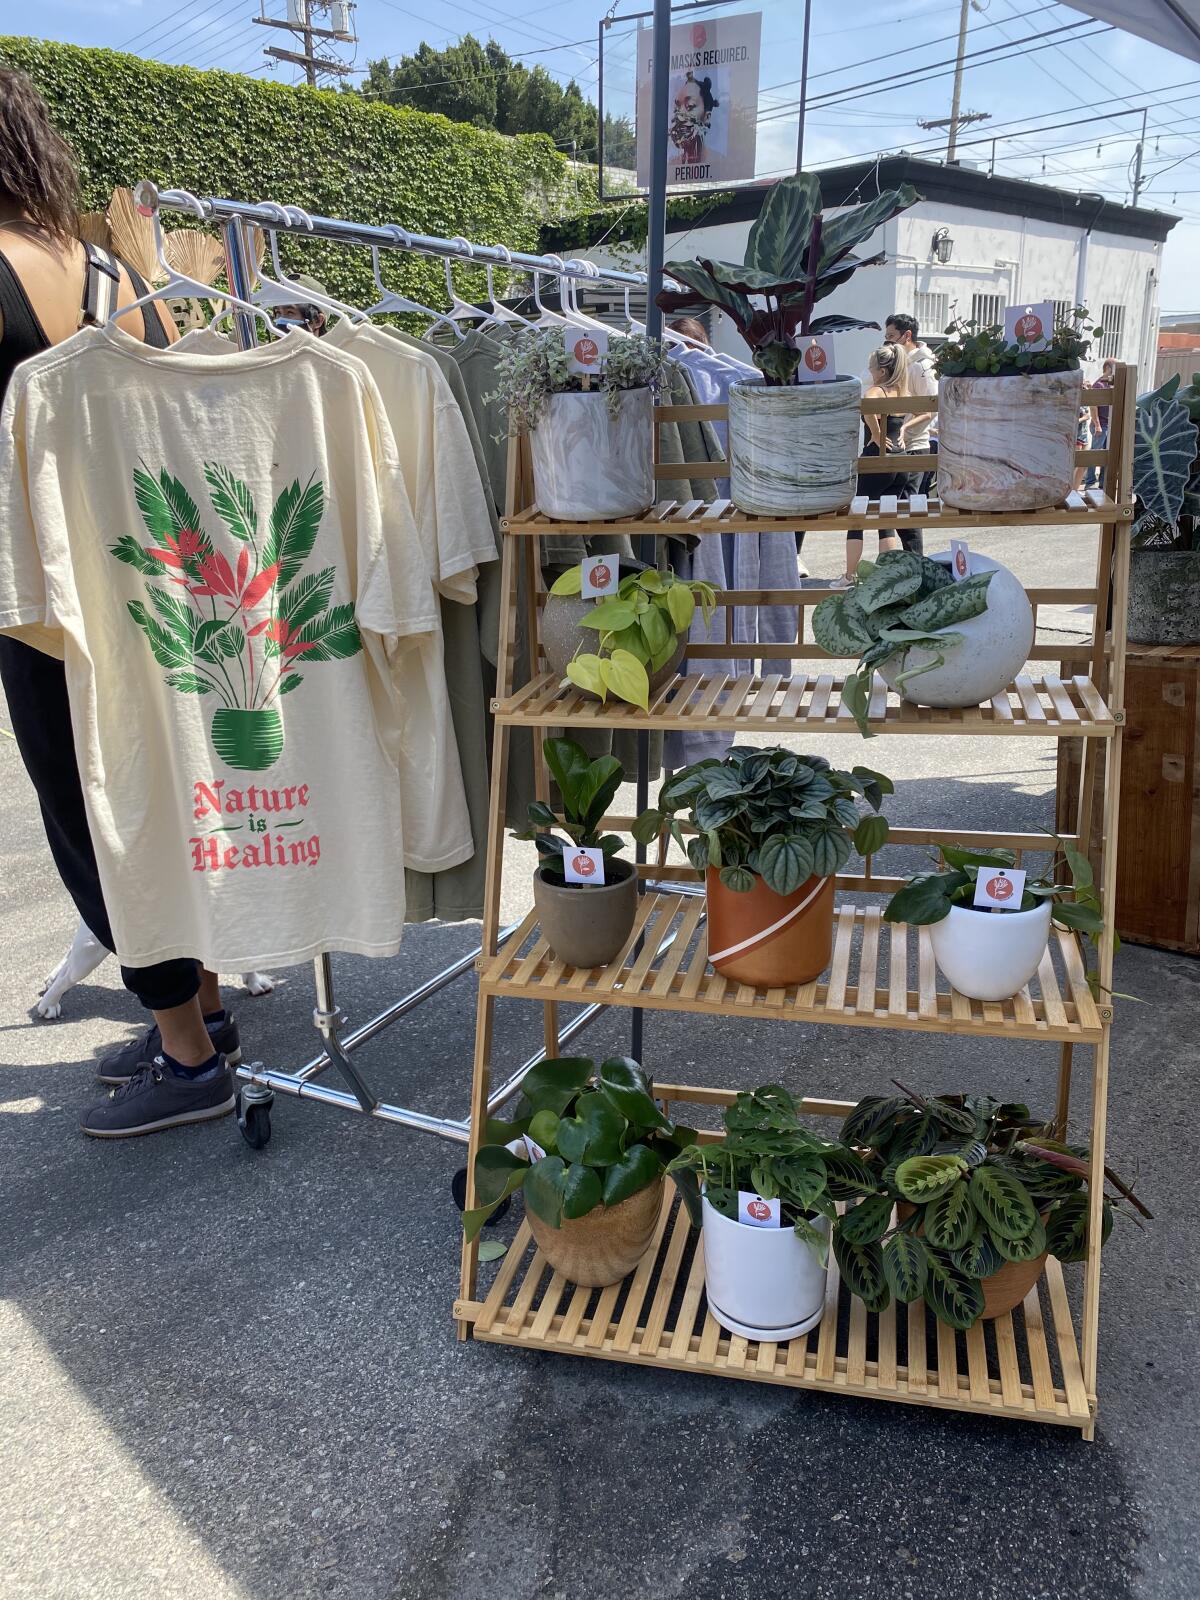 T-shirts and plants on display at an outdoor plant shop.